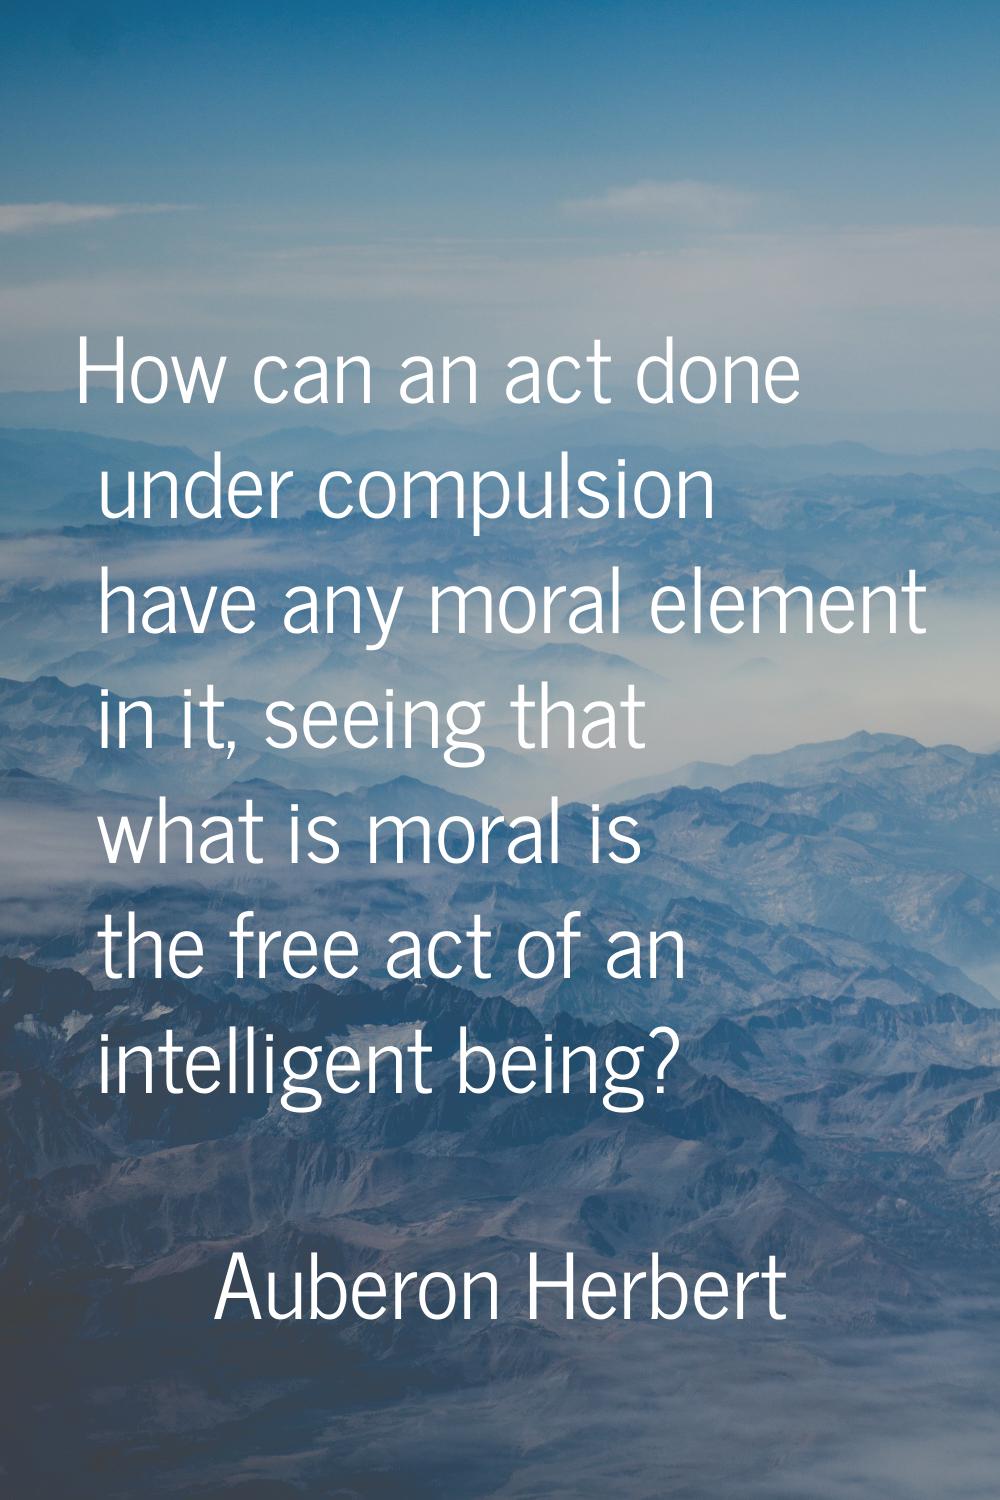 How can an act done under compulsion have any moral element in it, seeing that what is moral is the